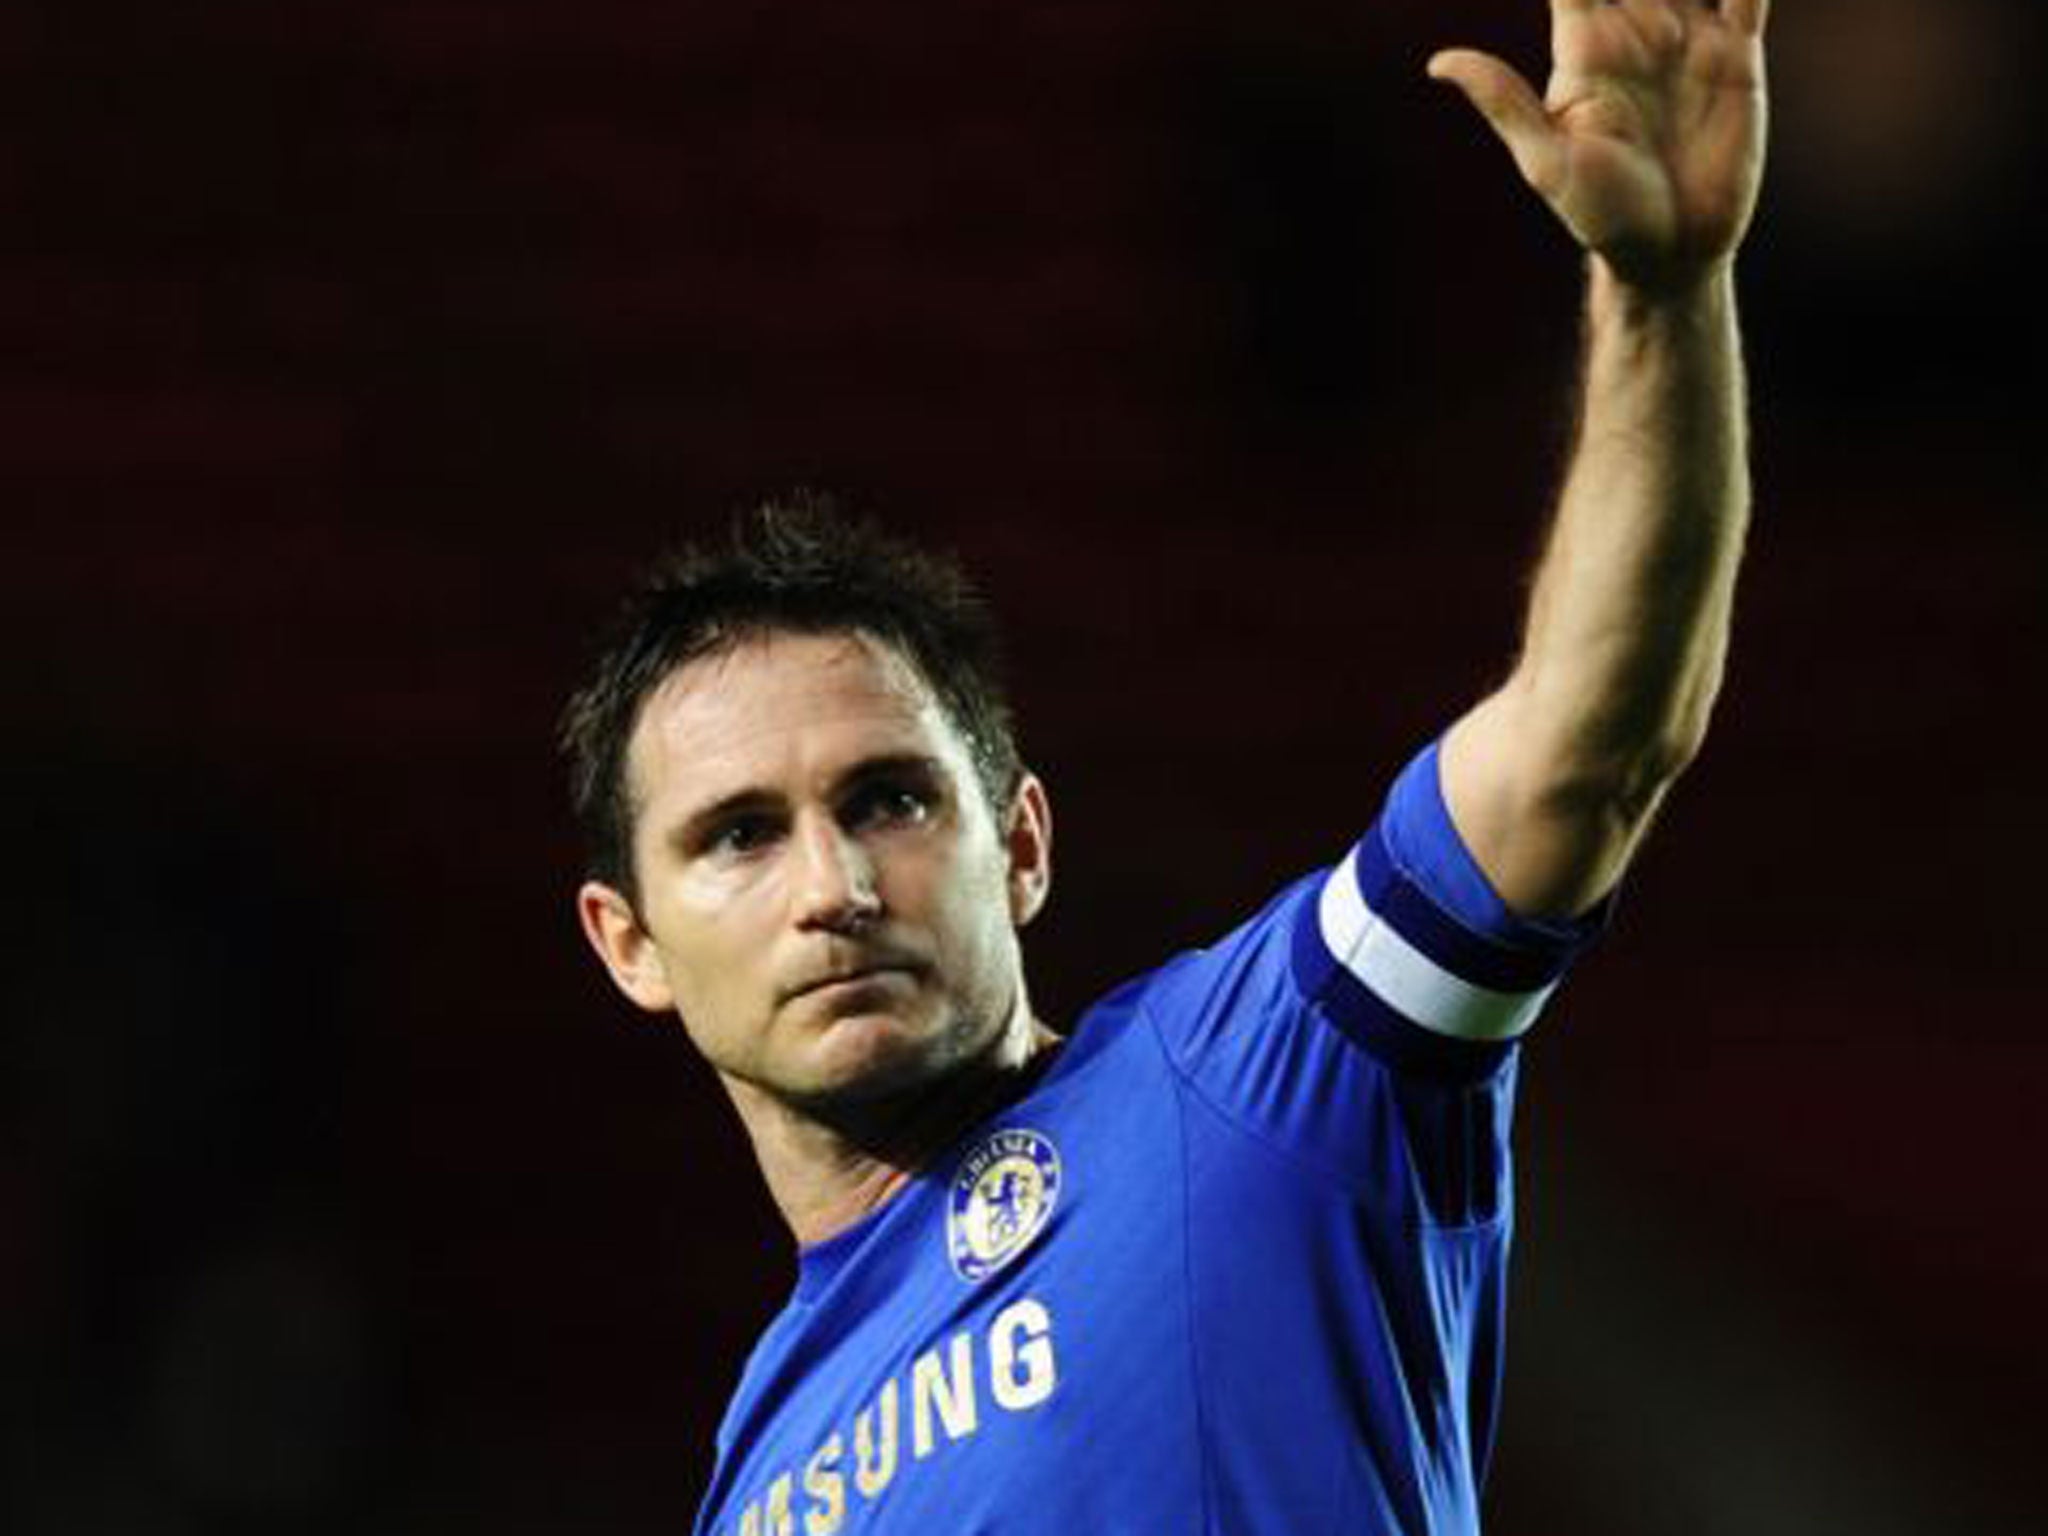 Sir Alex Ferguson has been monitoring Frank Lampard’s position at Chelsea and is considering making a sensational summer move for the player, whom he has always admired